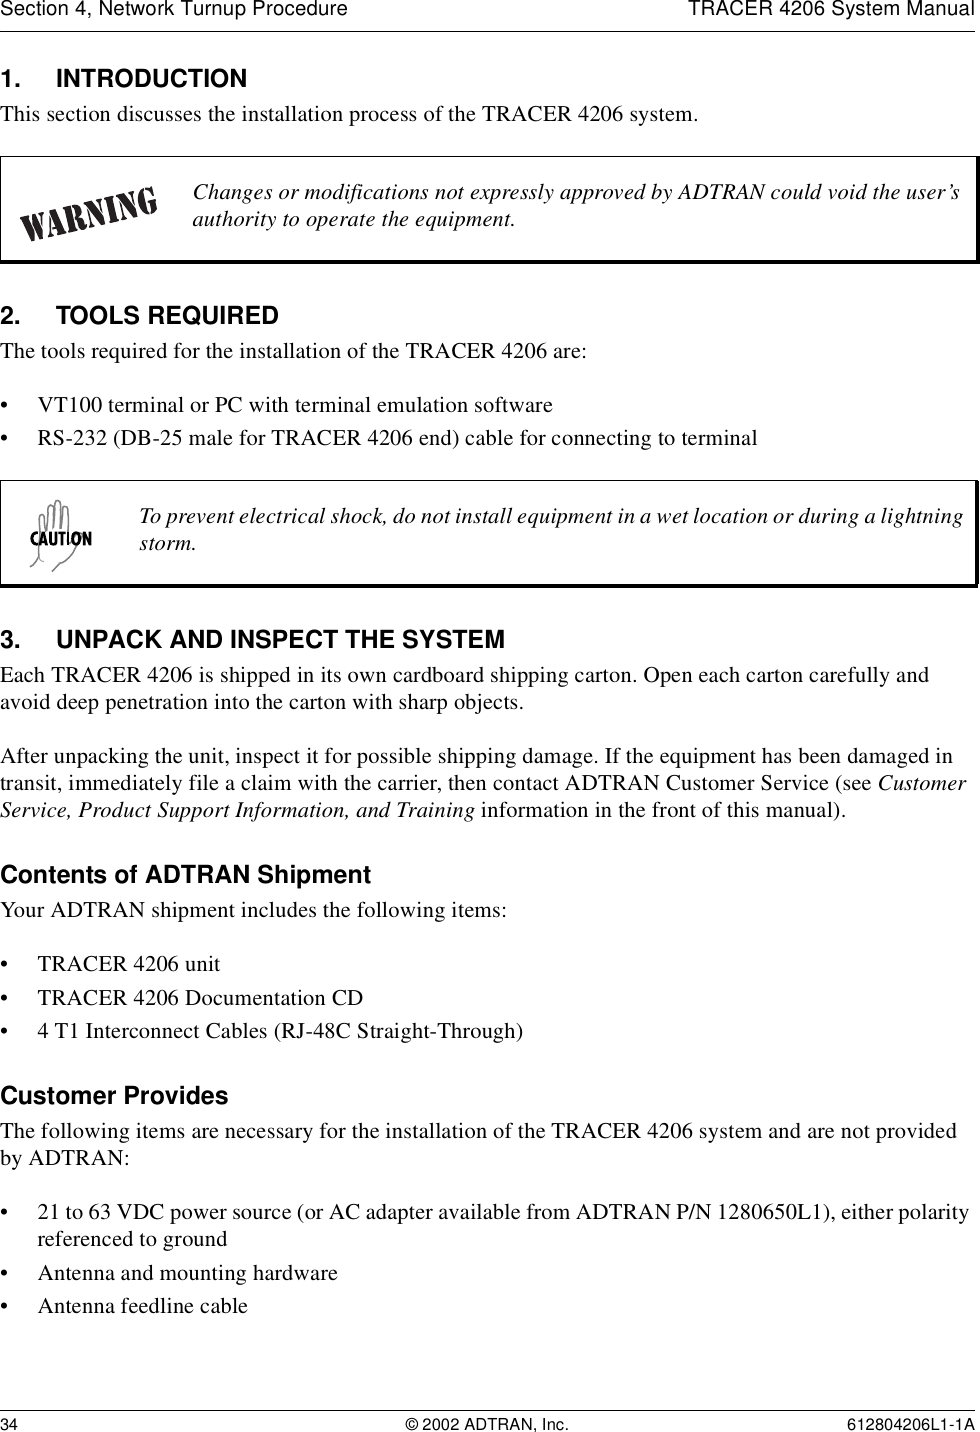 Section 4, Network Turnup Procedure TRACER 4206 System Manual34 © 2002 ADTRAN, Inc. 612804206L1-1A1. INTRODUCTIONThis section discusses the installation process of the TRACER 4206 system.2. TOOLS REQUIREDThe tools required for the installation of the TRACER 4206 are:• VT100 terminal or PC with terminal emulation software• RS-232 (DB-25 male for TRACER 4206 end) cable for connecting to terminal3. UNPACK AND INSPECT THE SYSTEMEach TRACER 4206 is shipped in its own cardboard shipping carton. Open each carton carefully and avoid deep penetration into the carton with sharp objects. After unpacking the unit, inspect it for possible shipping damage. If the equipment has been damaged in transit, immediately file a claim with the carrier, then contact ADTRAN Customer Service (see Customer Service, Product Support Information, and Training information in the front of this manual).Contents of ADTRAN ShipmentYour ADTRAN shipment includes the following items:• TRACER 4206 unit• TRACER 4206 Documentation CD• 4 T1 Interconnect Cables (RJ-48C Straight-Through)Customer ProvidesThe following items are necessary for the installation of the TRACER 4206 system and are not provided by ADTRAN:• 21 to 63 VDC power source (or AC adapter available from ADTRAN P/N 1280650L1), either polarity referenced to ground• Antenna and mounting hardware• Antenna feedline cableChanges or modifications not expressly approved by ADTRAN could void the user’s authority to operate the equipment.To prevent electrical shock, do not install equipment in a wet location or during a lightning storm.